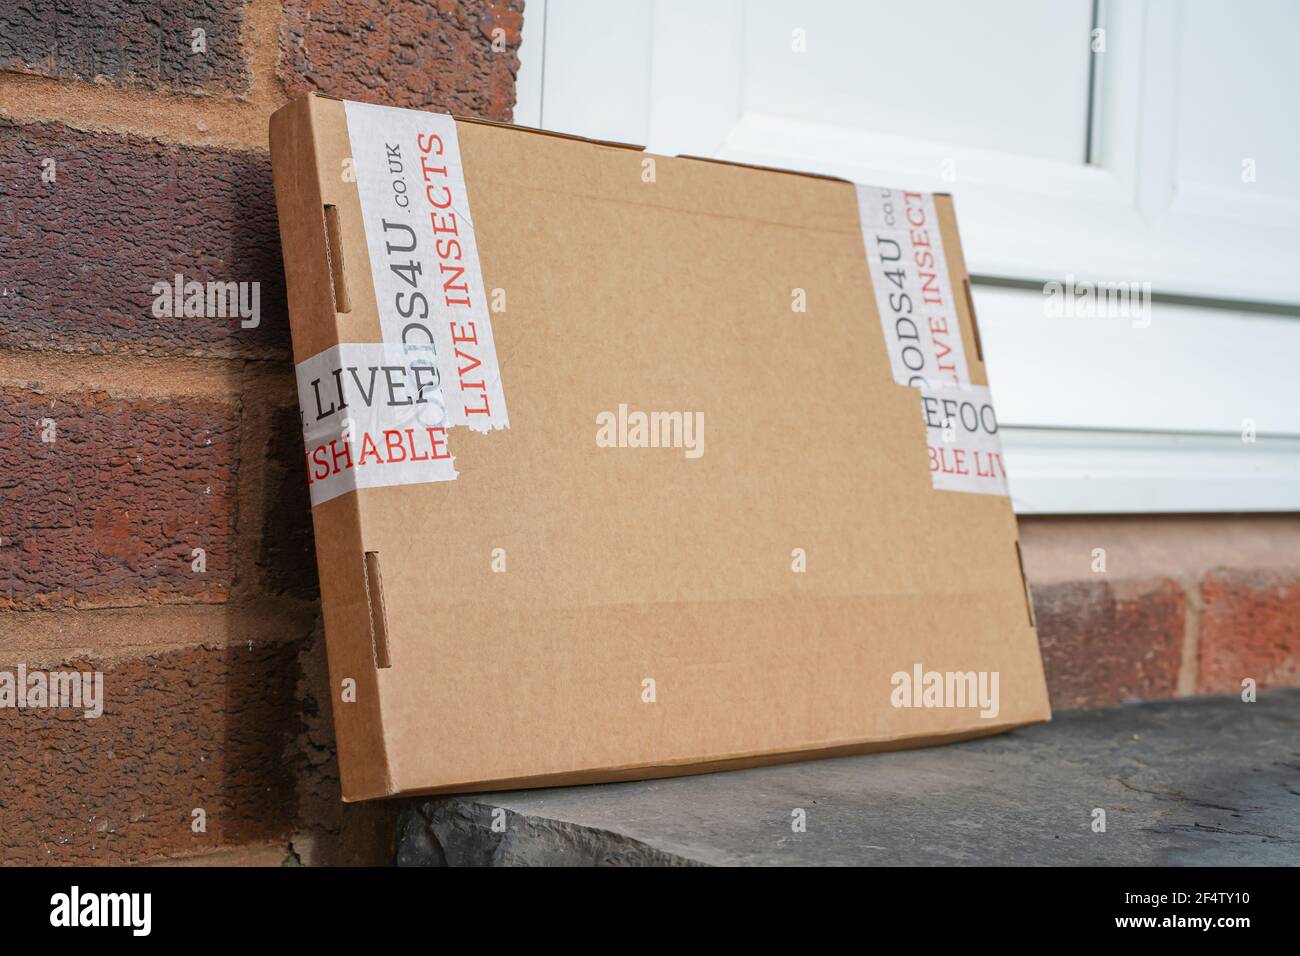 A box of live insects deliverd in a cardboard box to a front door of a UK residential house. Unusual parcel delivery. Stock Photo